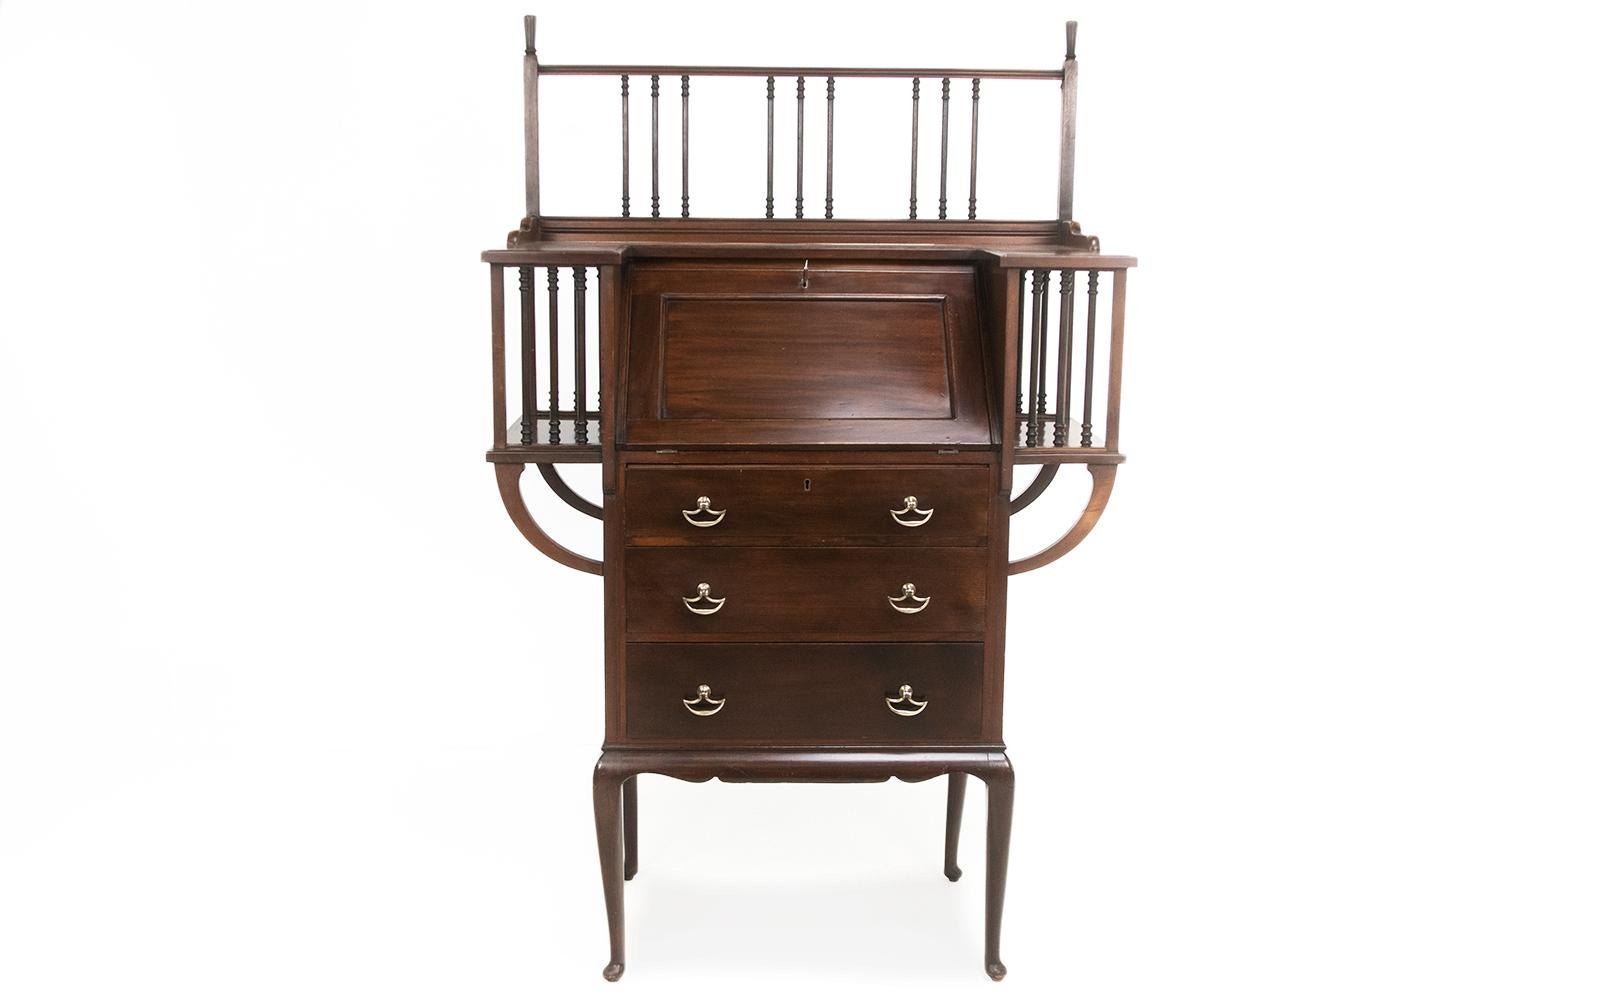 Arts & Crafts Bureau

Impactful Arts & Crafts mahogany bureau writing desk by Maple and Co, London.

'U' shaped top with a heavily spindled gallery, enclosing a fall front opening to pigeon holes, small drawers, and a skiver inset writing